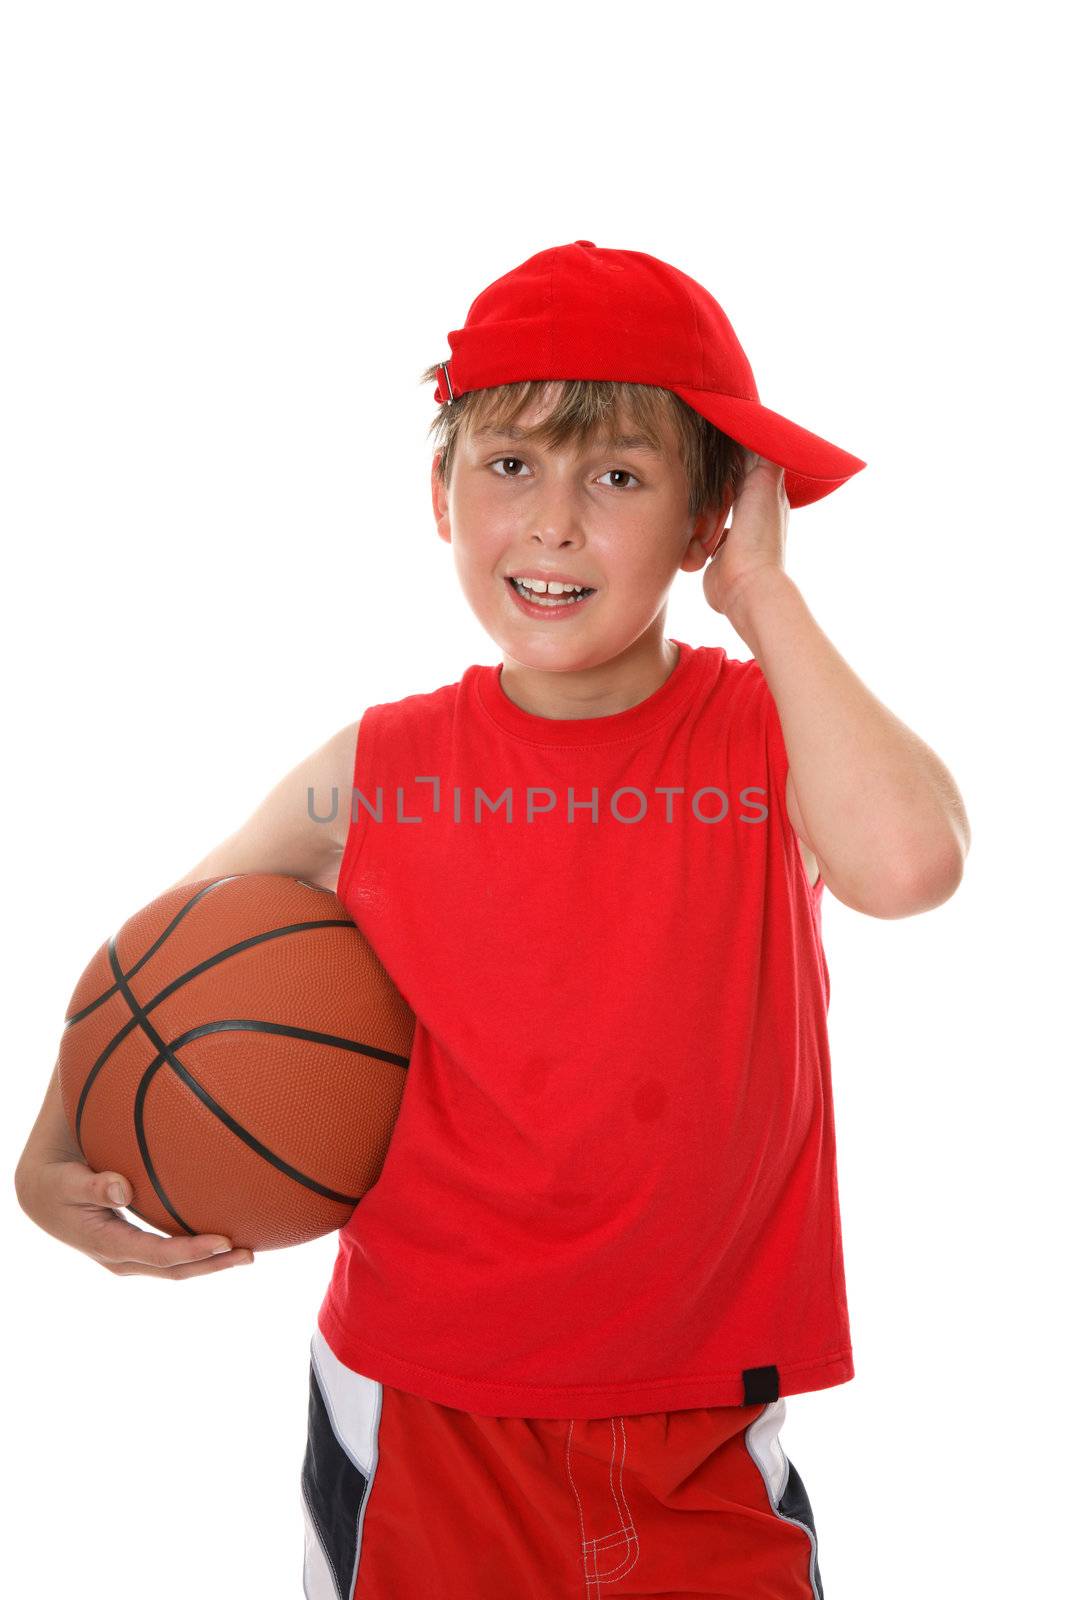 Flushed child holding a basketball aftera game.